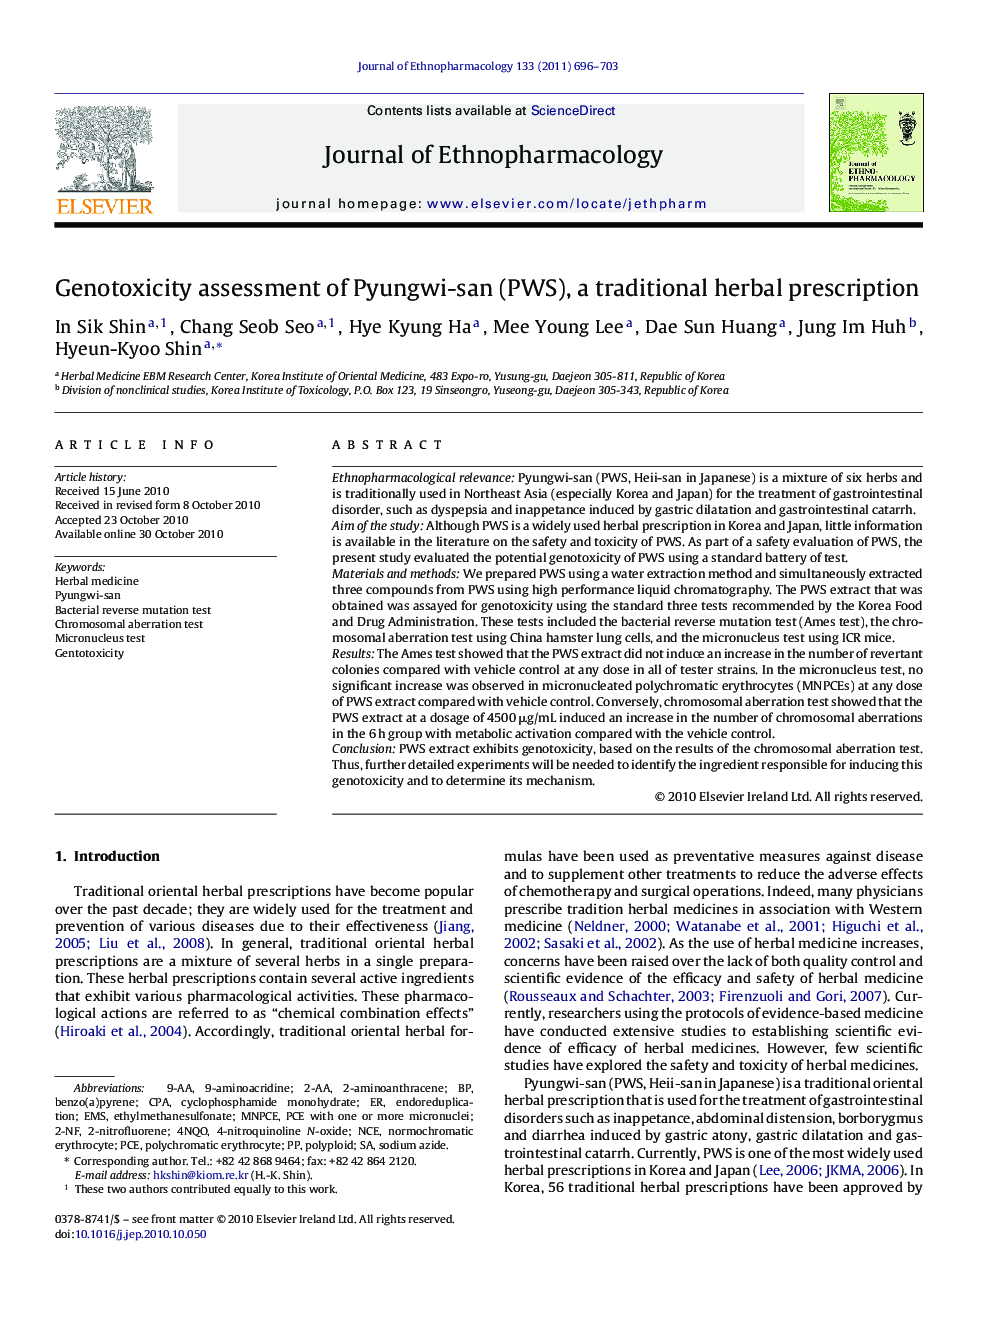 Genotoxicity assessment of Pyungwi-san (PWS), a traditional herbal prescription